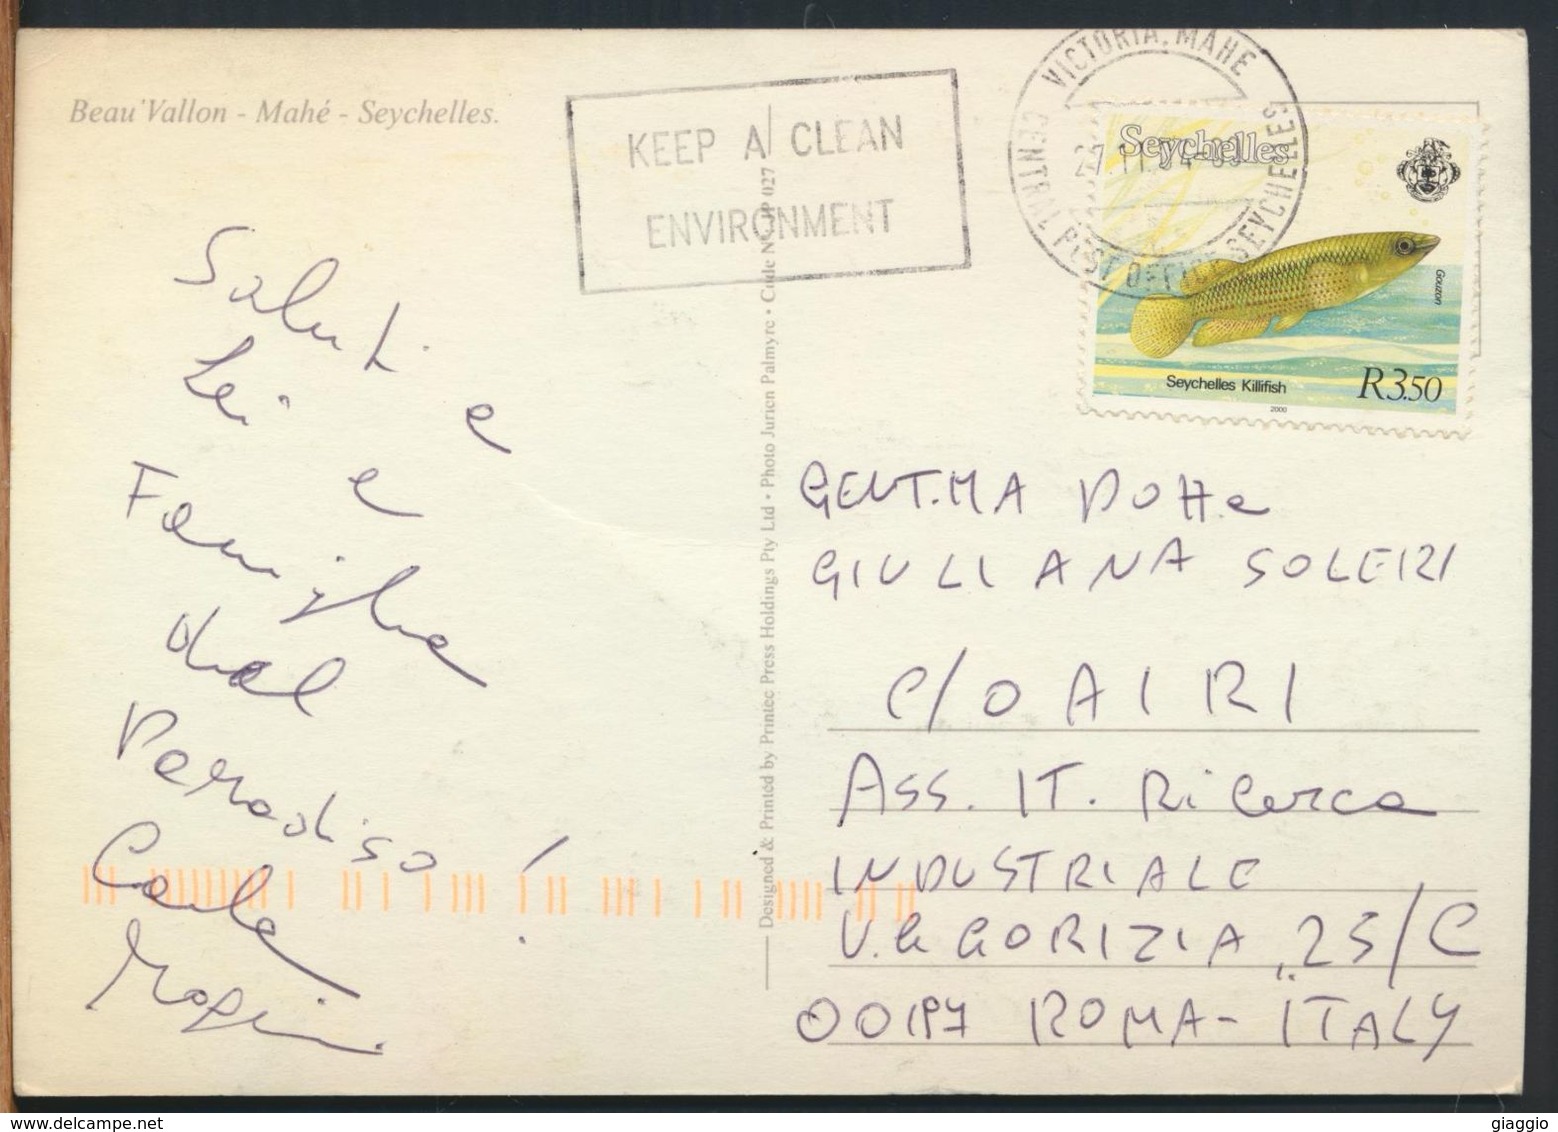 °°° 10592 - SEYCHELLES - BEAU VALLON - MAHE - With Stamps °°° - Seychelles